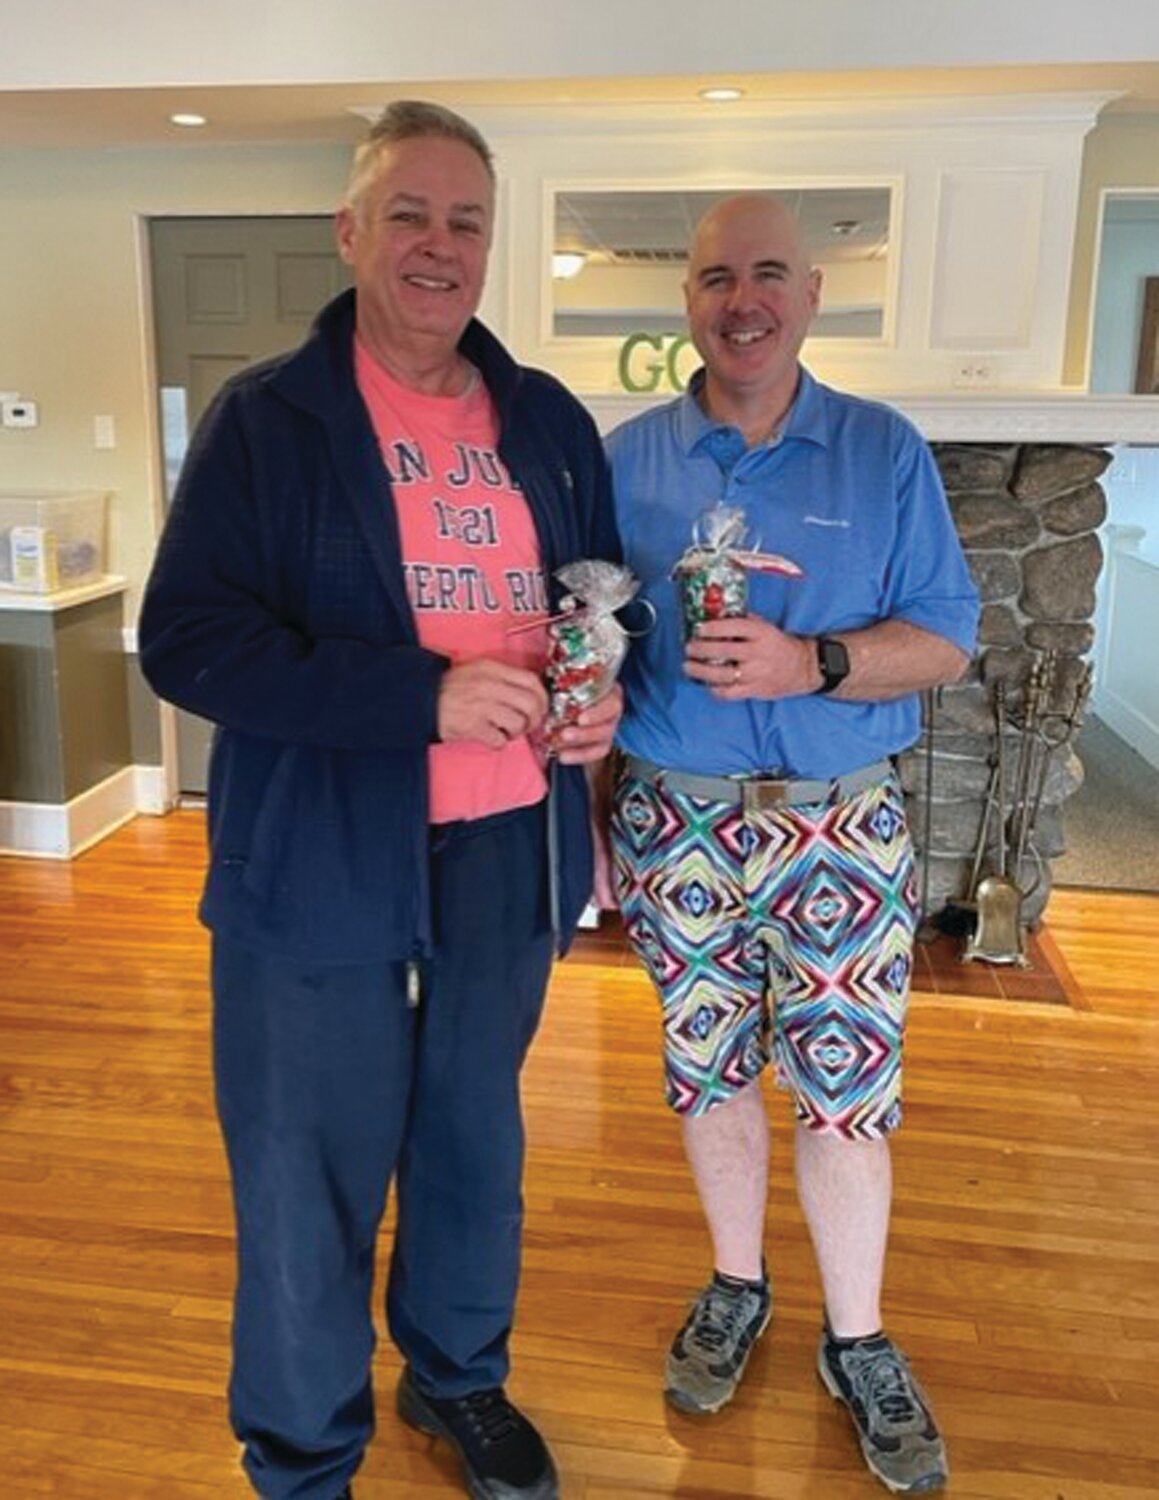 CHAMP’S CORNER: Chris Dumas and Walter Geer are all smiles after winning the 8th annual Polar Golf Tournament at Glocester Country Club.